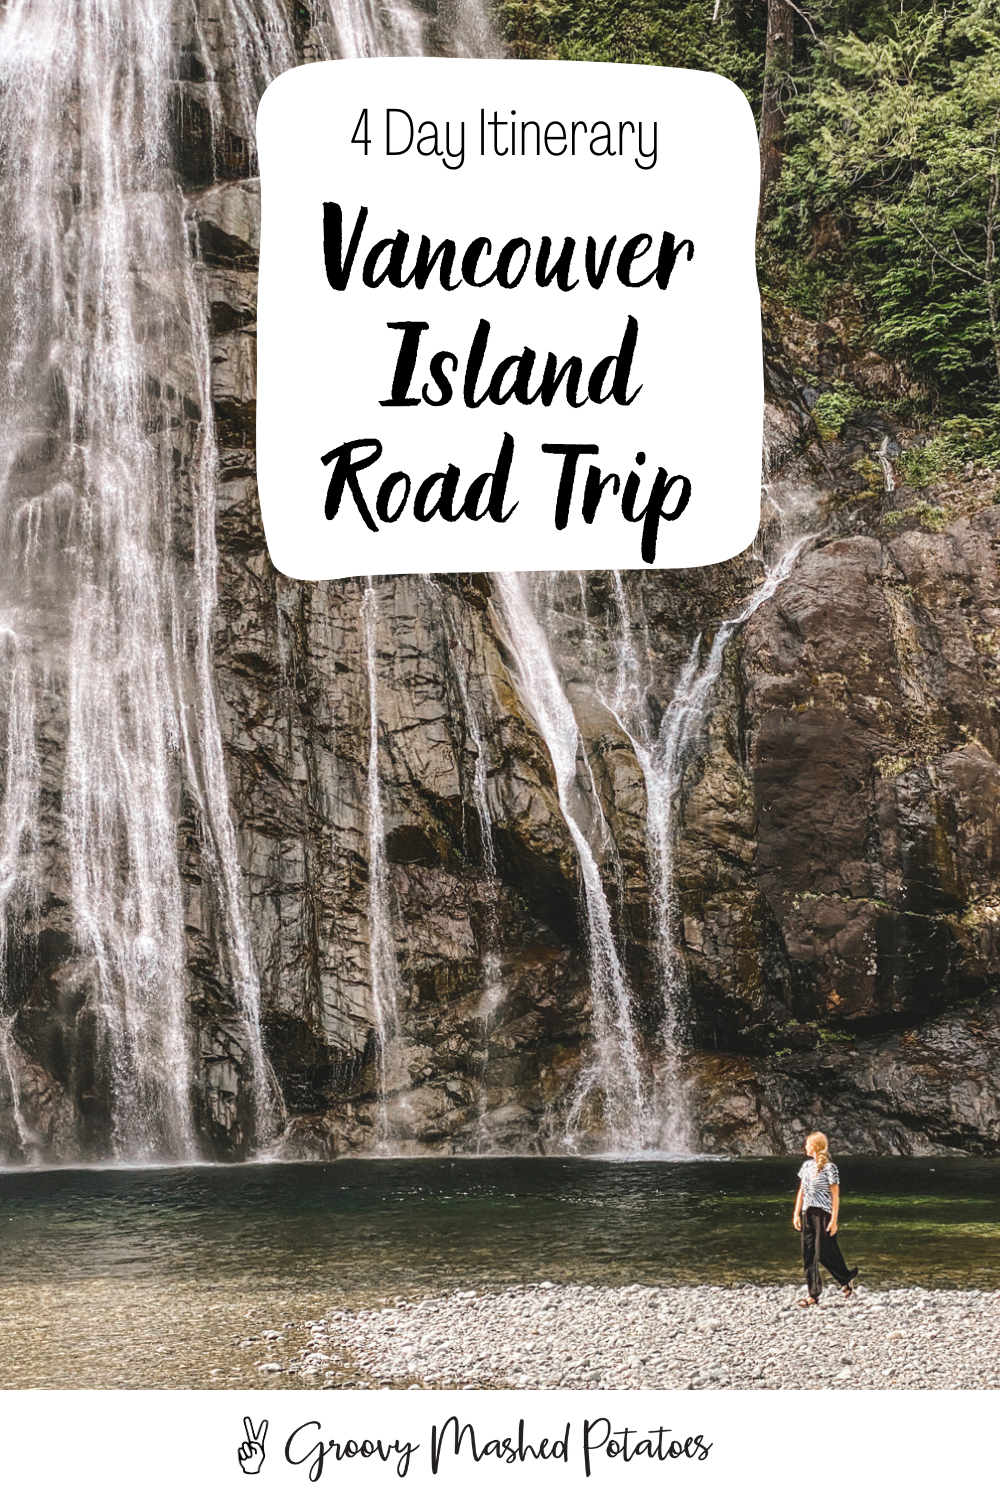 4 Day Nanaimo to Tofino Road Trip for Relaxation & Adventure